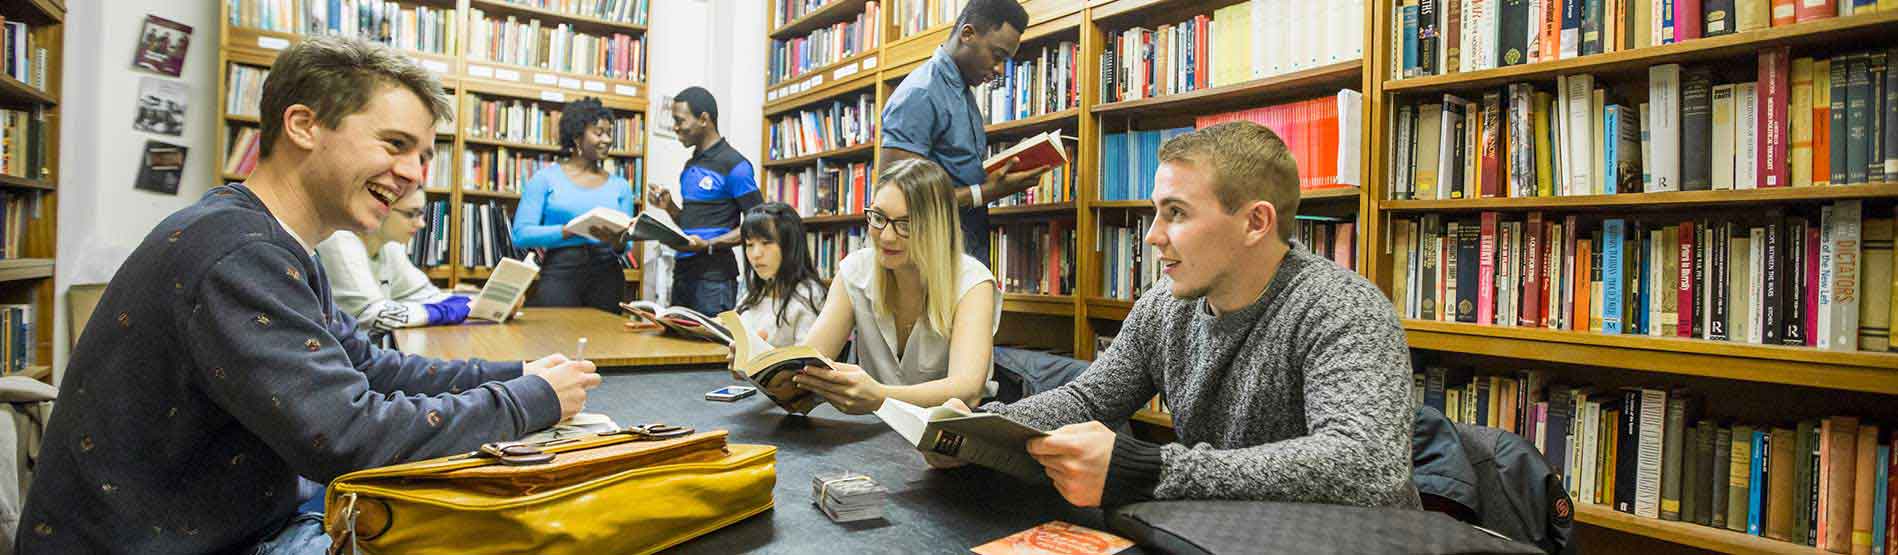 Photograph of students enjoying their studies in the library